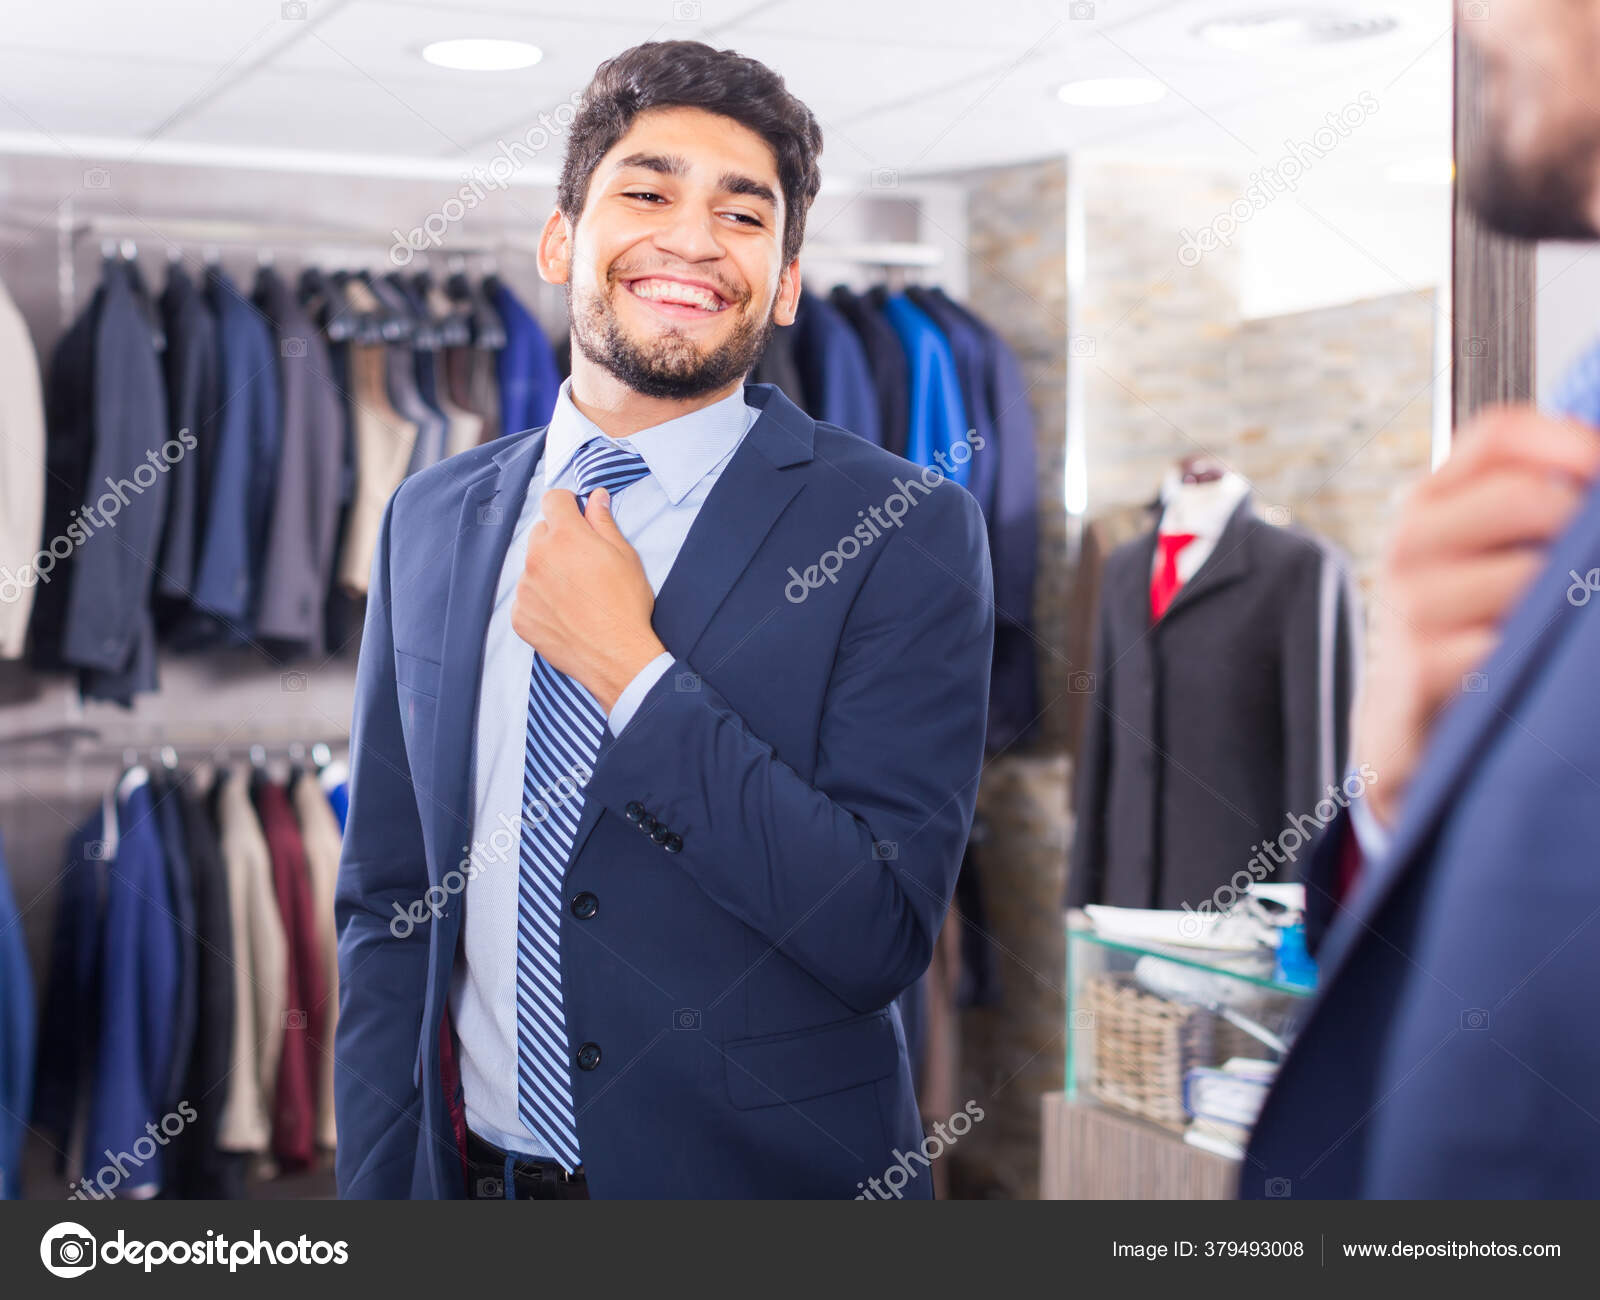 Male Trying Tie Front Mirror Men Shop — Stock Photo © Jim_Filim #379493008